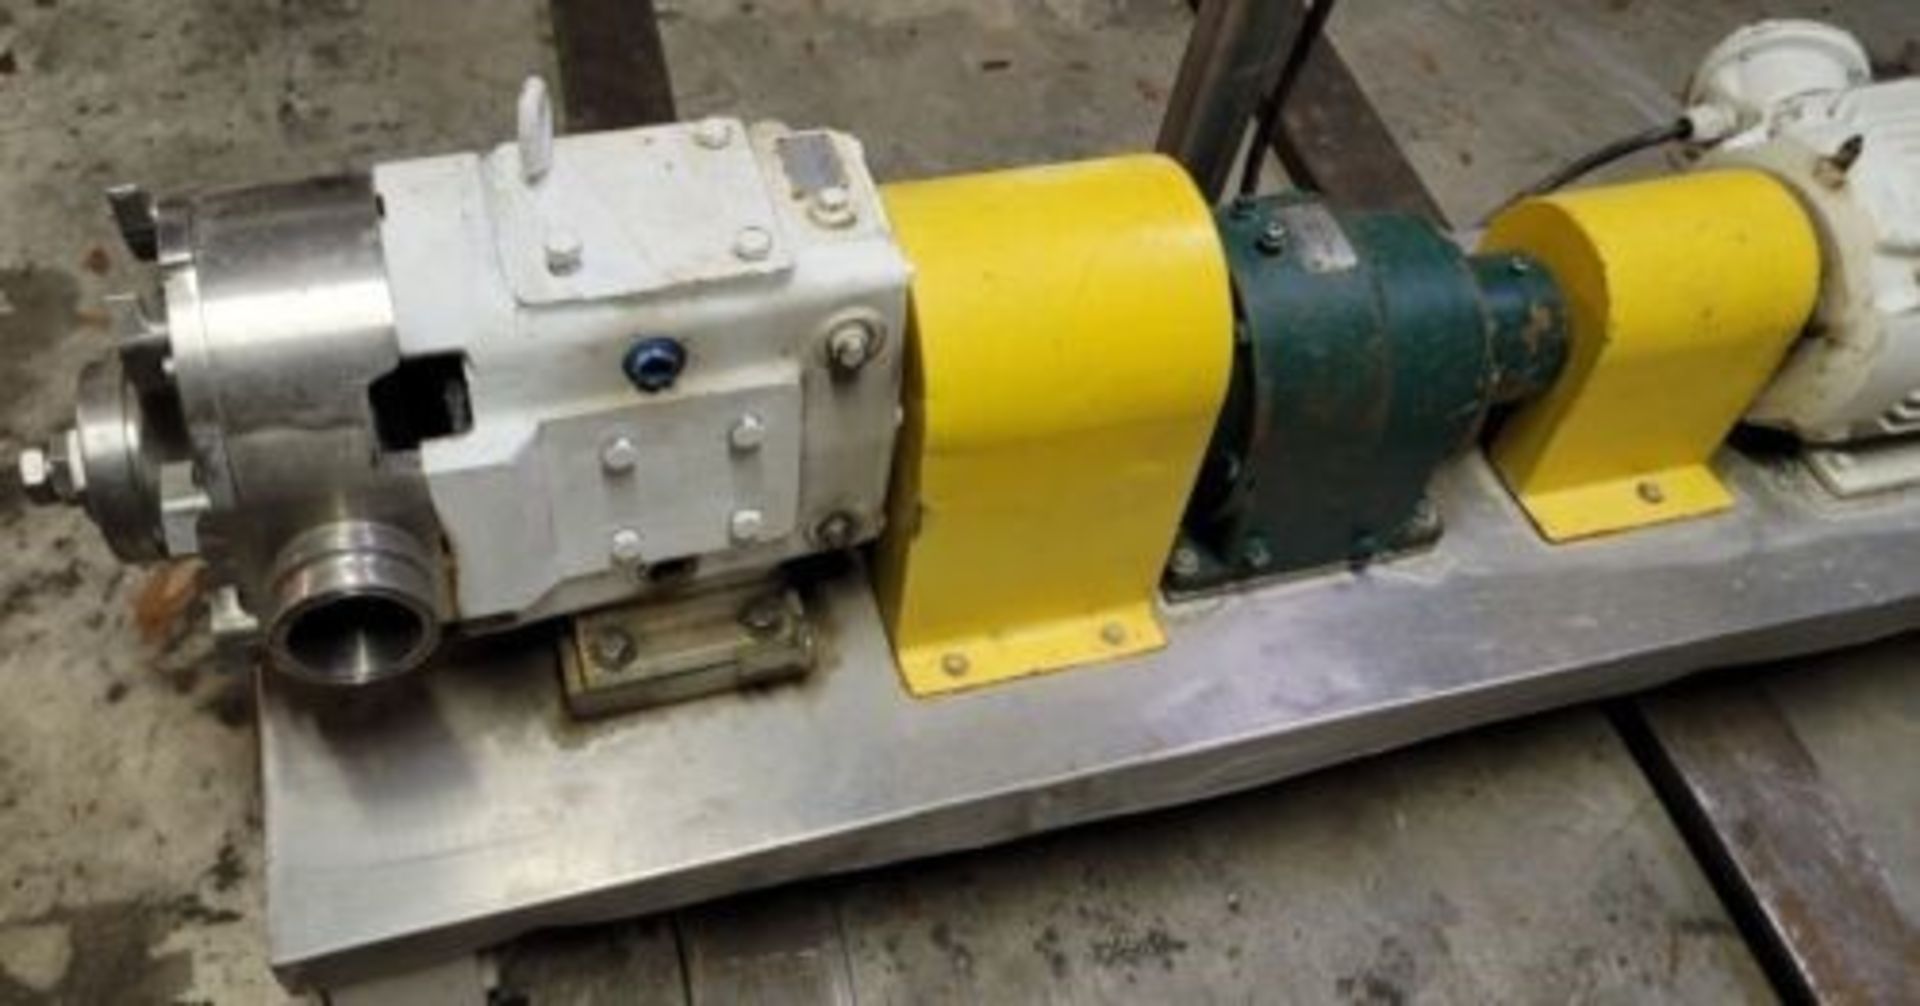 WAUKESHA 130 Positive Displacement Pump with 3in Outlet, 10HP Motor. 230/460V 1755 RPM, Last used in - Image 4 of 4